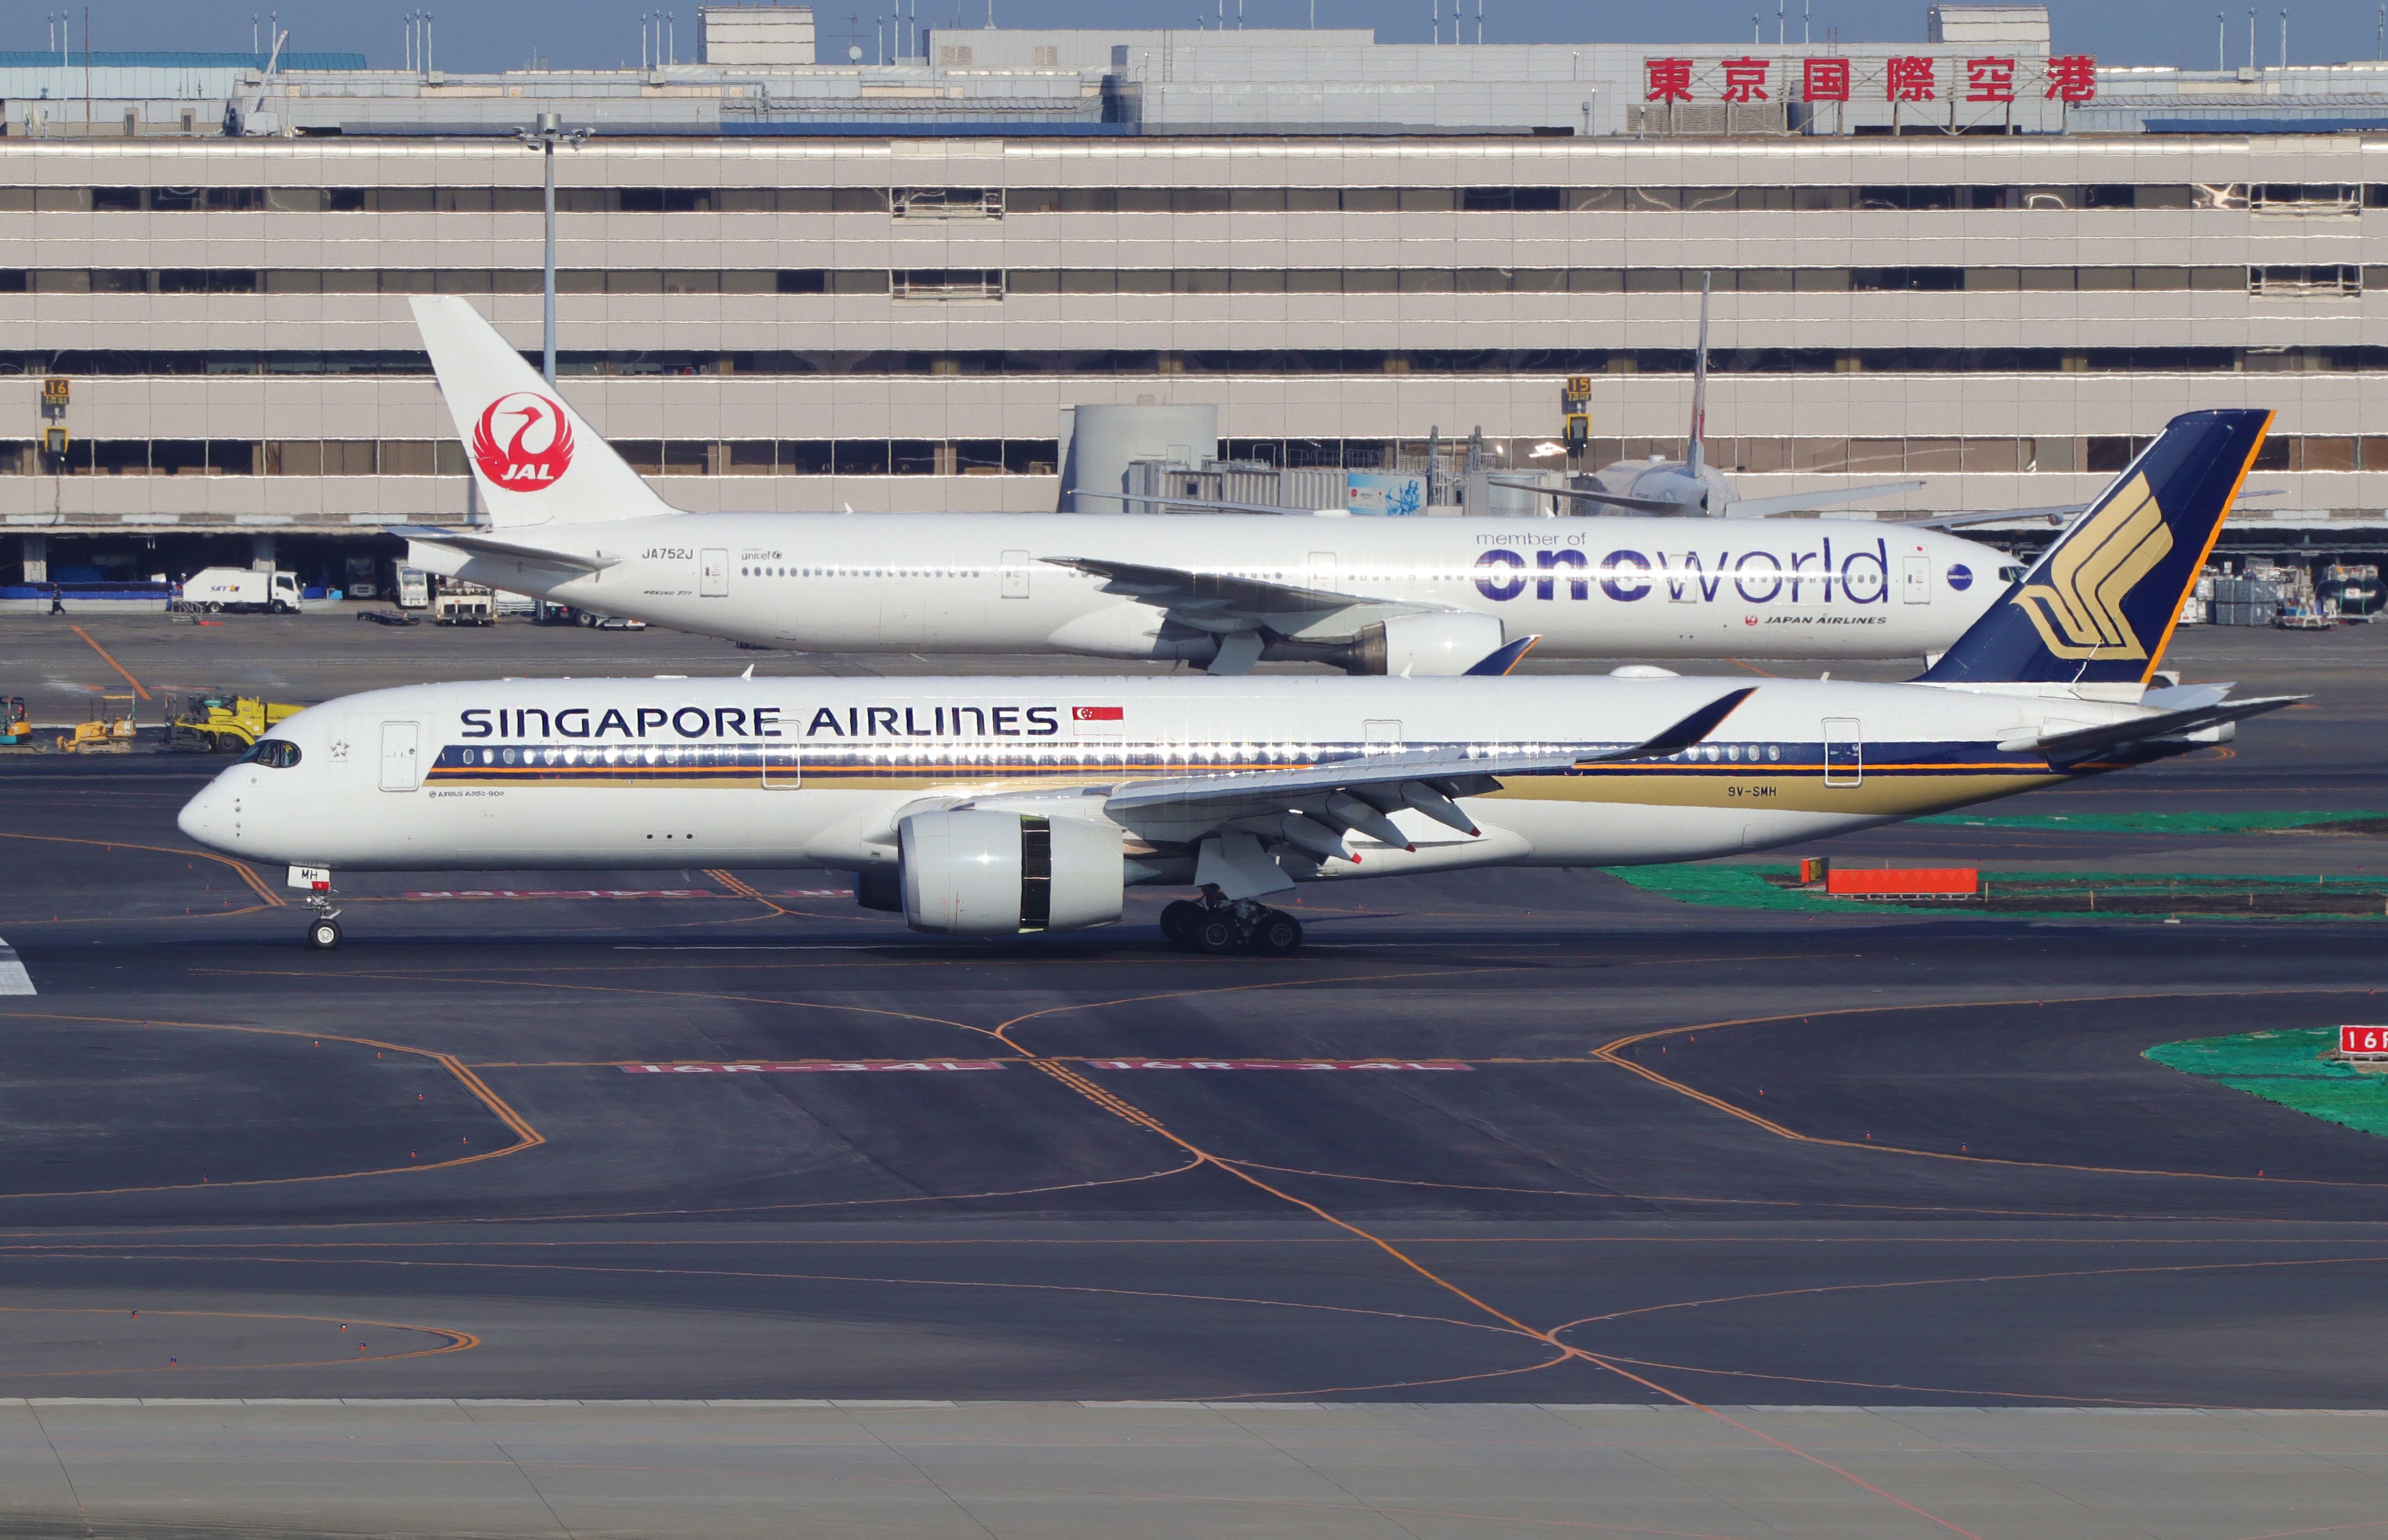 A Japan Airlines Boeing 777 and Singapore Airlines Airbus A350 on an airport apron.